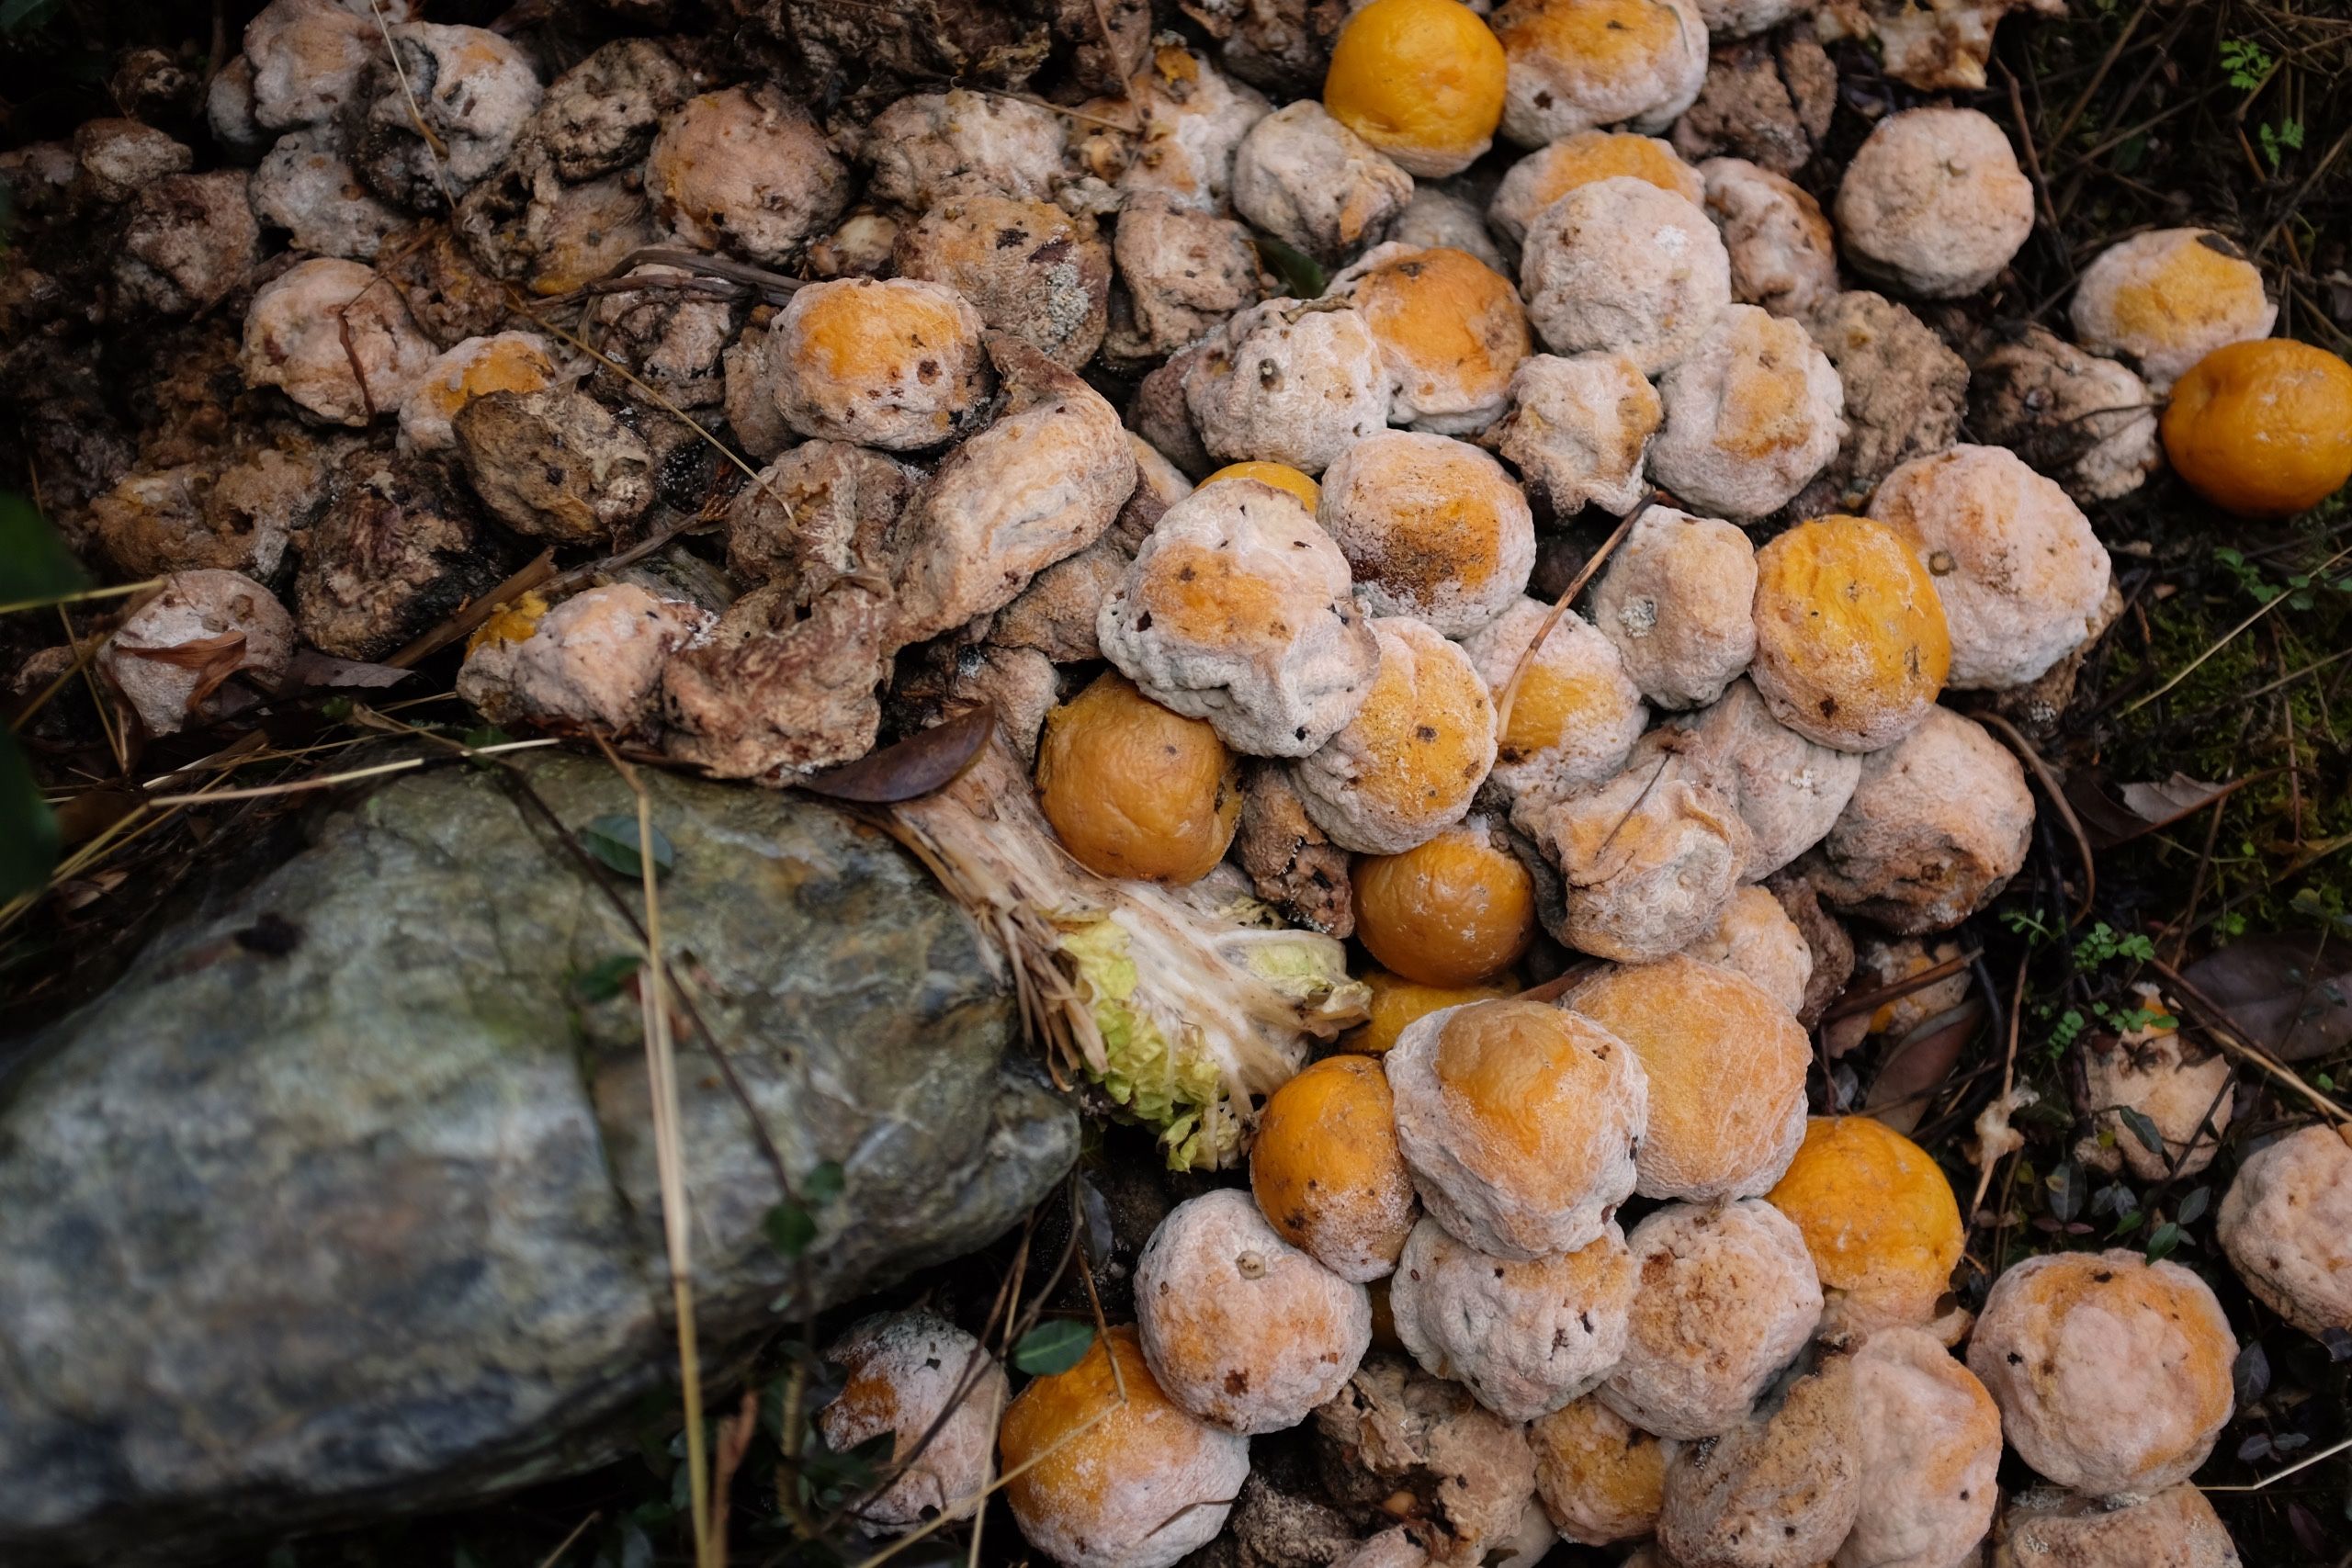 A large pile of rotting oranges in the undergrowth.